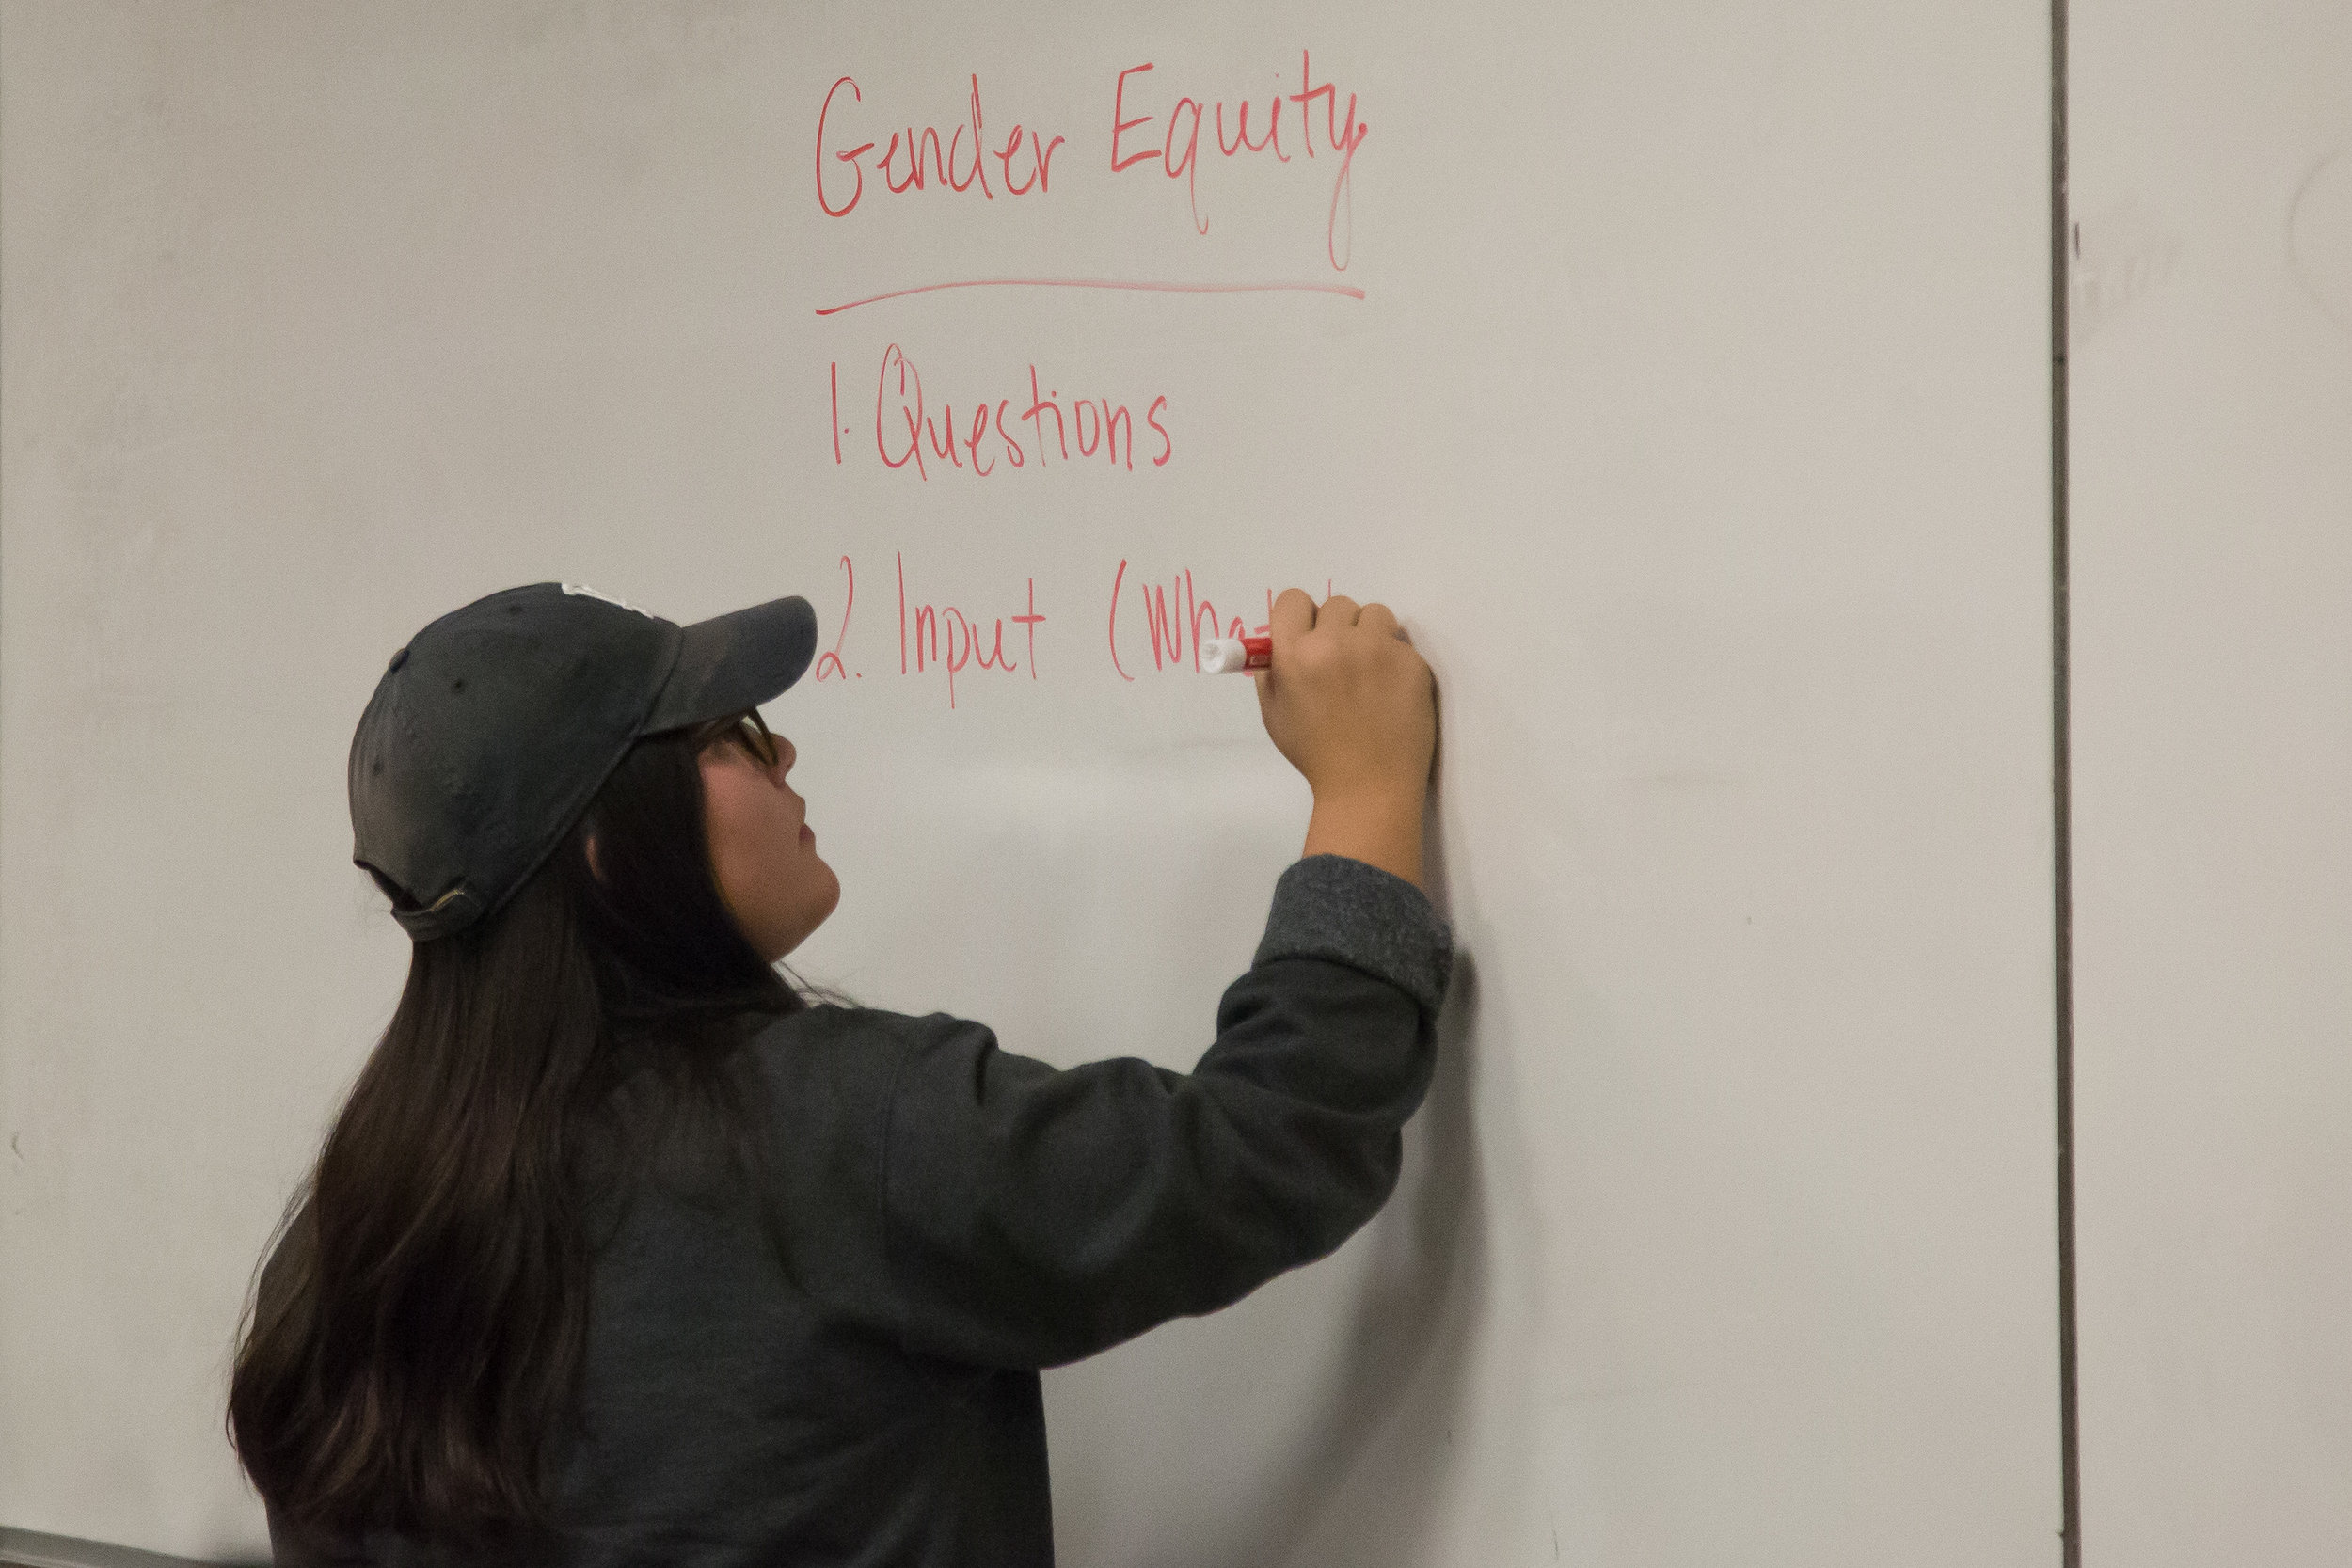  Melissa Avina-Beltran writes opinions came up from Gender Equity and Social Justice Center Committee Meeting took place on Tuesday, December 5th, 2017 at Humanities & Social Sciences Building in Santa Monica College Main Campus in Santa Monica, Cali